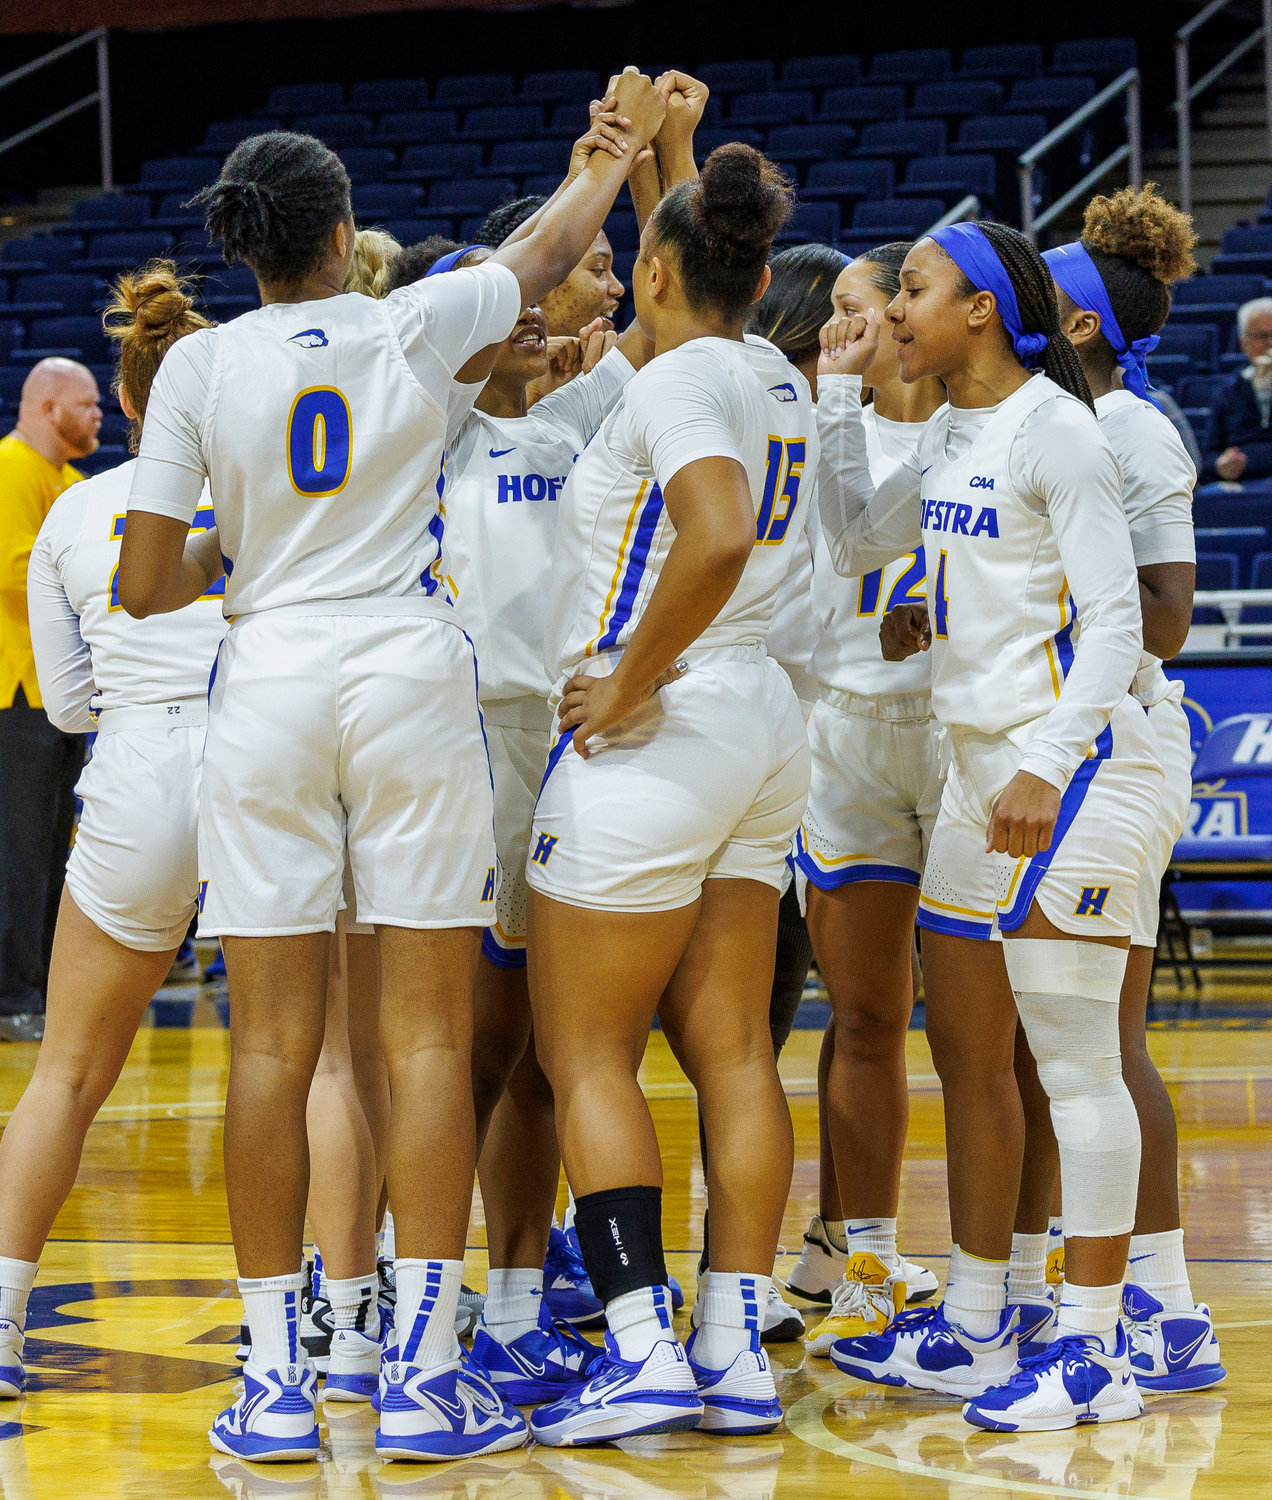 Hofstra’s women’s team is making early strides and aims to prove the preseason rankings wrong.